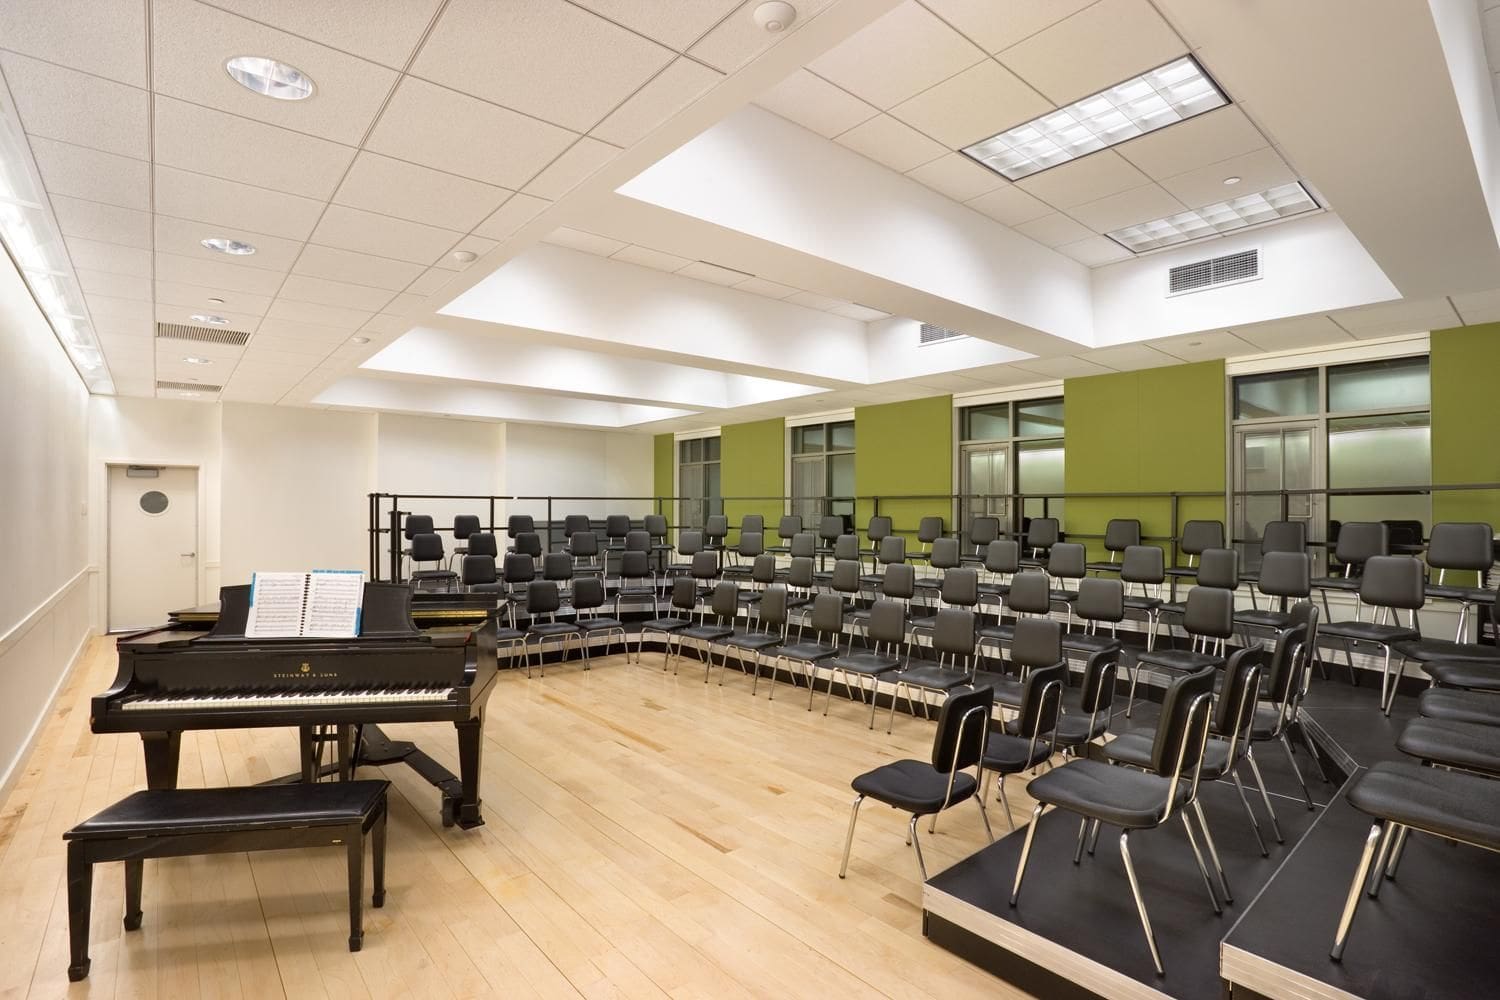 A large room with chairs and a piano